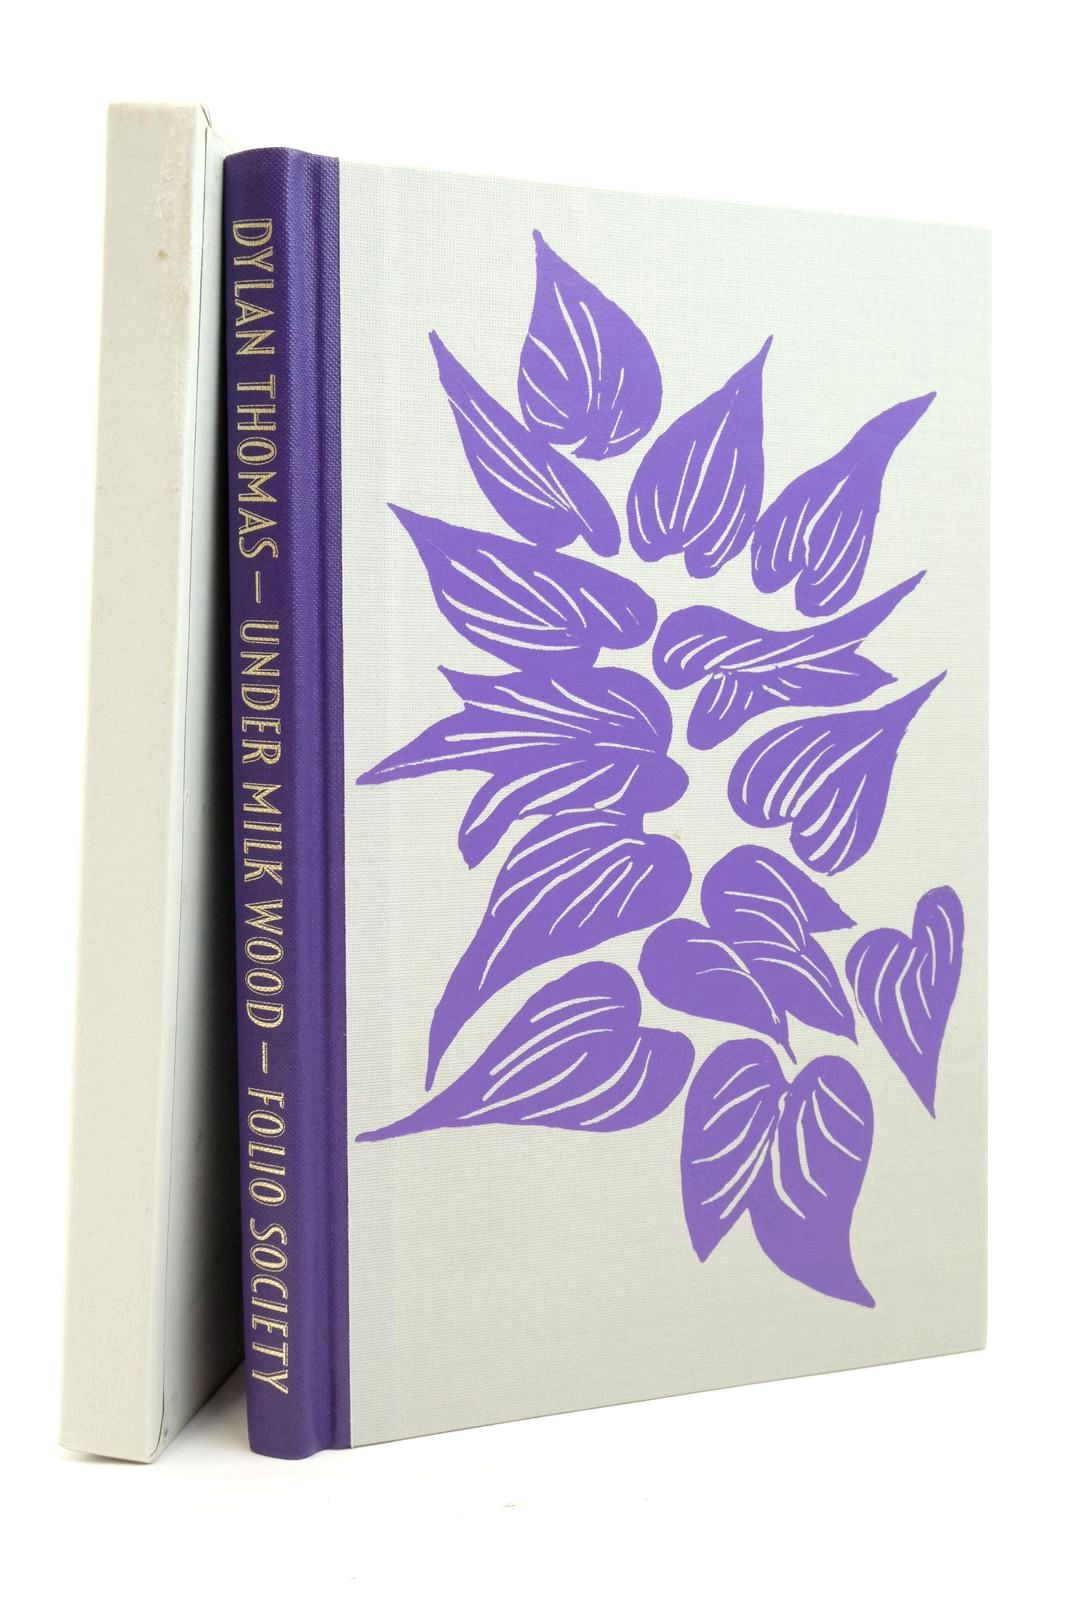 Photo of UNDER MILK WOOD written by Thomas, Dylan Cleverdon, Douglas illustrated by Richards, Ceri published by Folio Society (STOCK CODE: 2138110)  for sale by Stella & Rose's Books